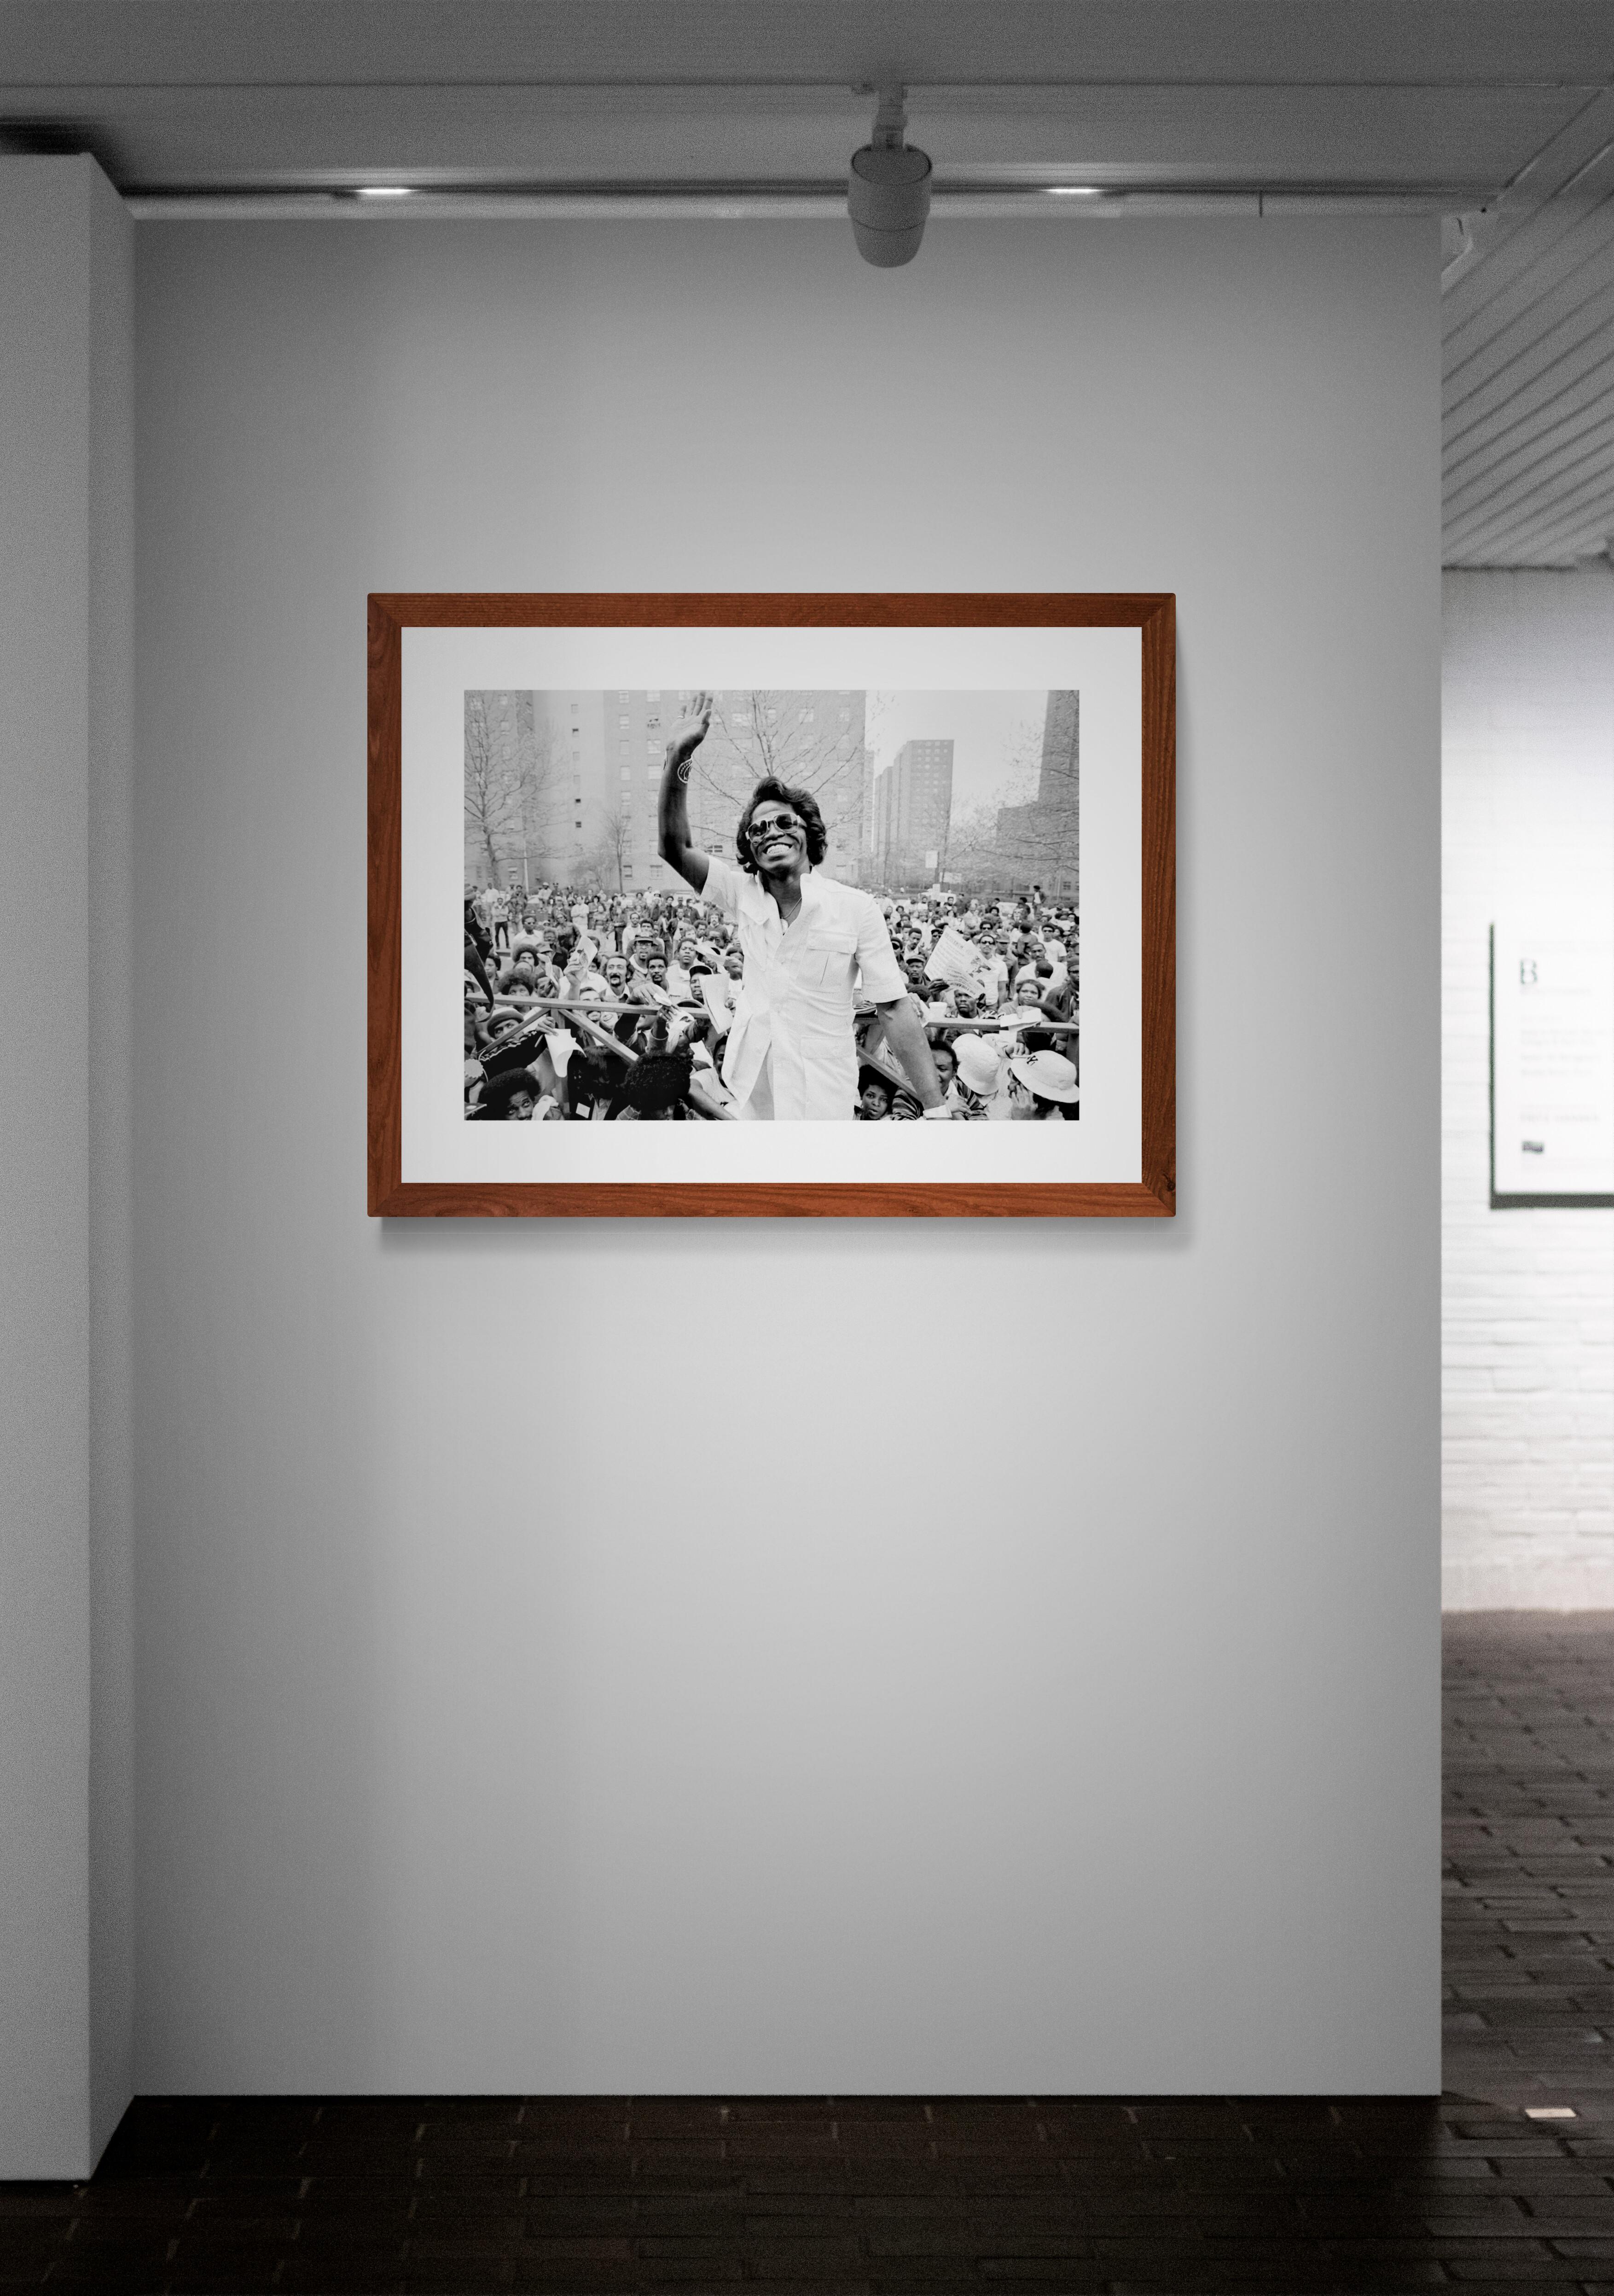 Title: James Brown #1 Photo
Artist: Richard E. Aaron
Estate Edition: Hand numbered with estate chop mark in the margin, signature stamp on verso, archival pigment print on Hahnemühle Photo Rag Pearl, 100% cotton paper fine art paper. Authorized